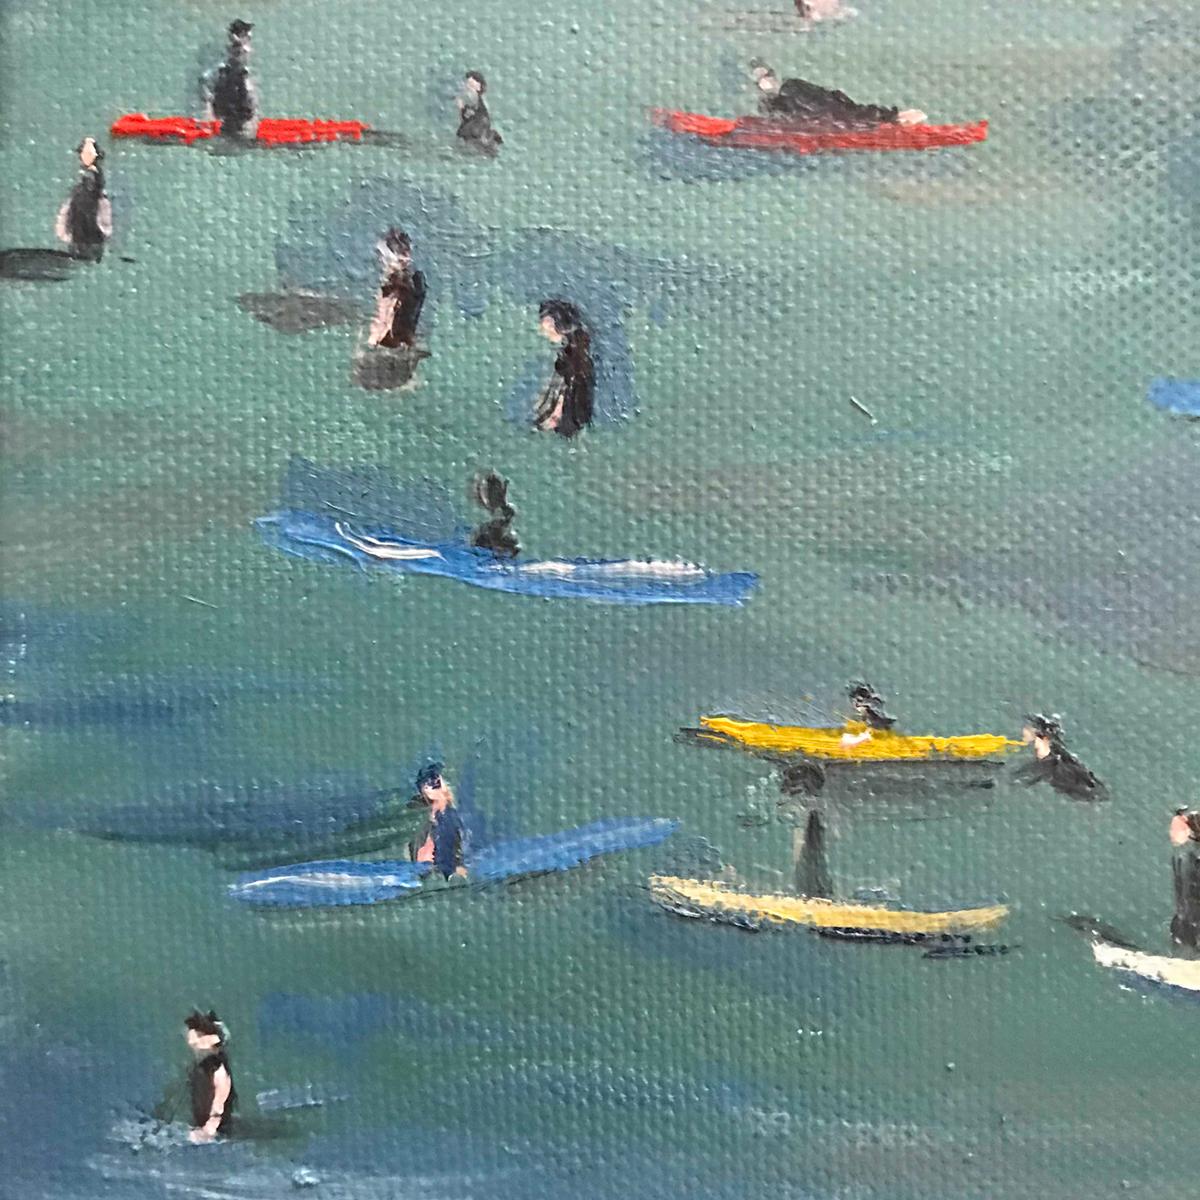 Polzeath Surfers is an Original Painting by Eleanor Woolley Painted in the Artist's Gloucestershire Studio, Polzeath Surfers is Inspired by a trip to Cornwall last Summer. Photographs were taken and sketches of the surfers were made to obtain the